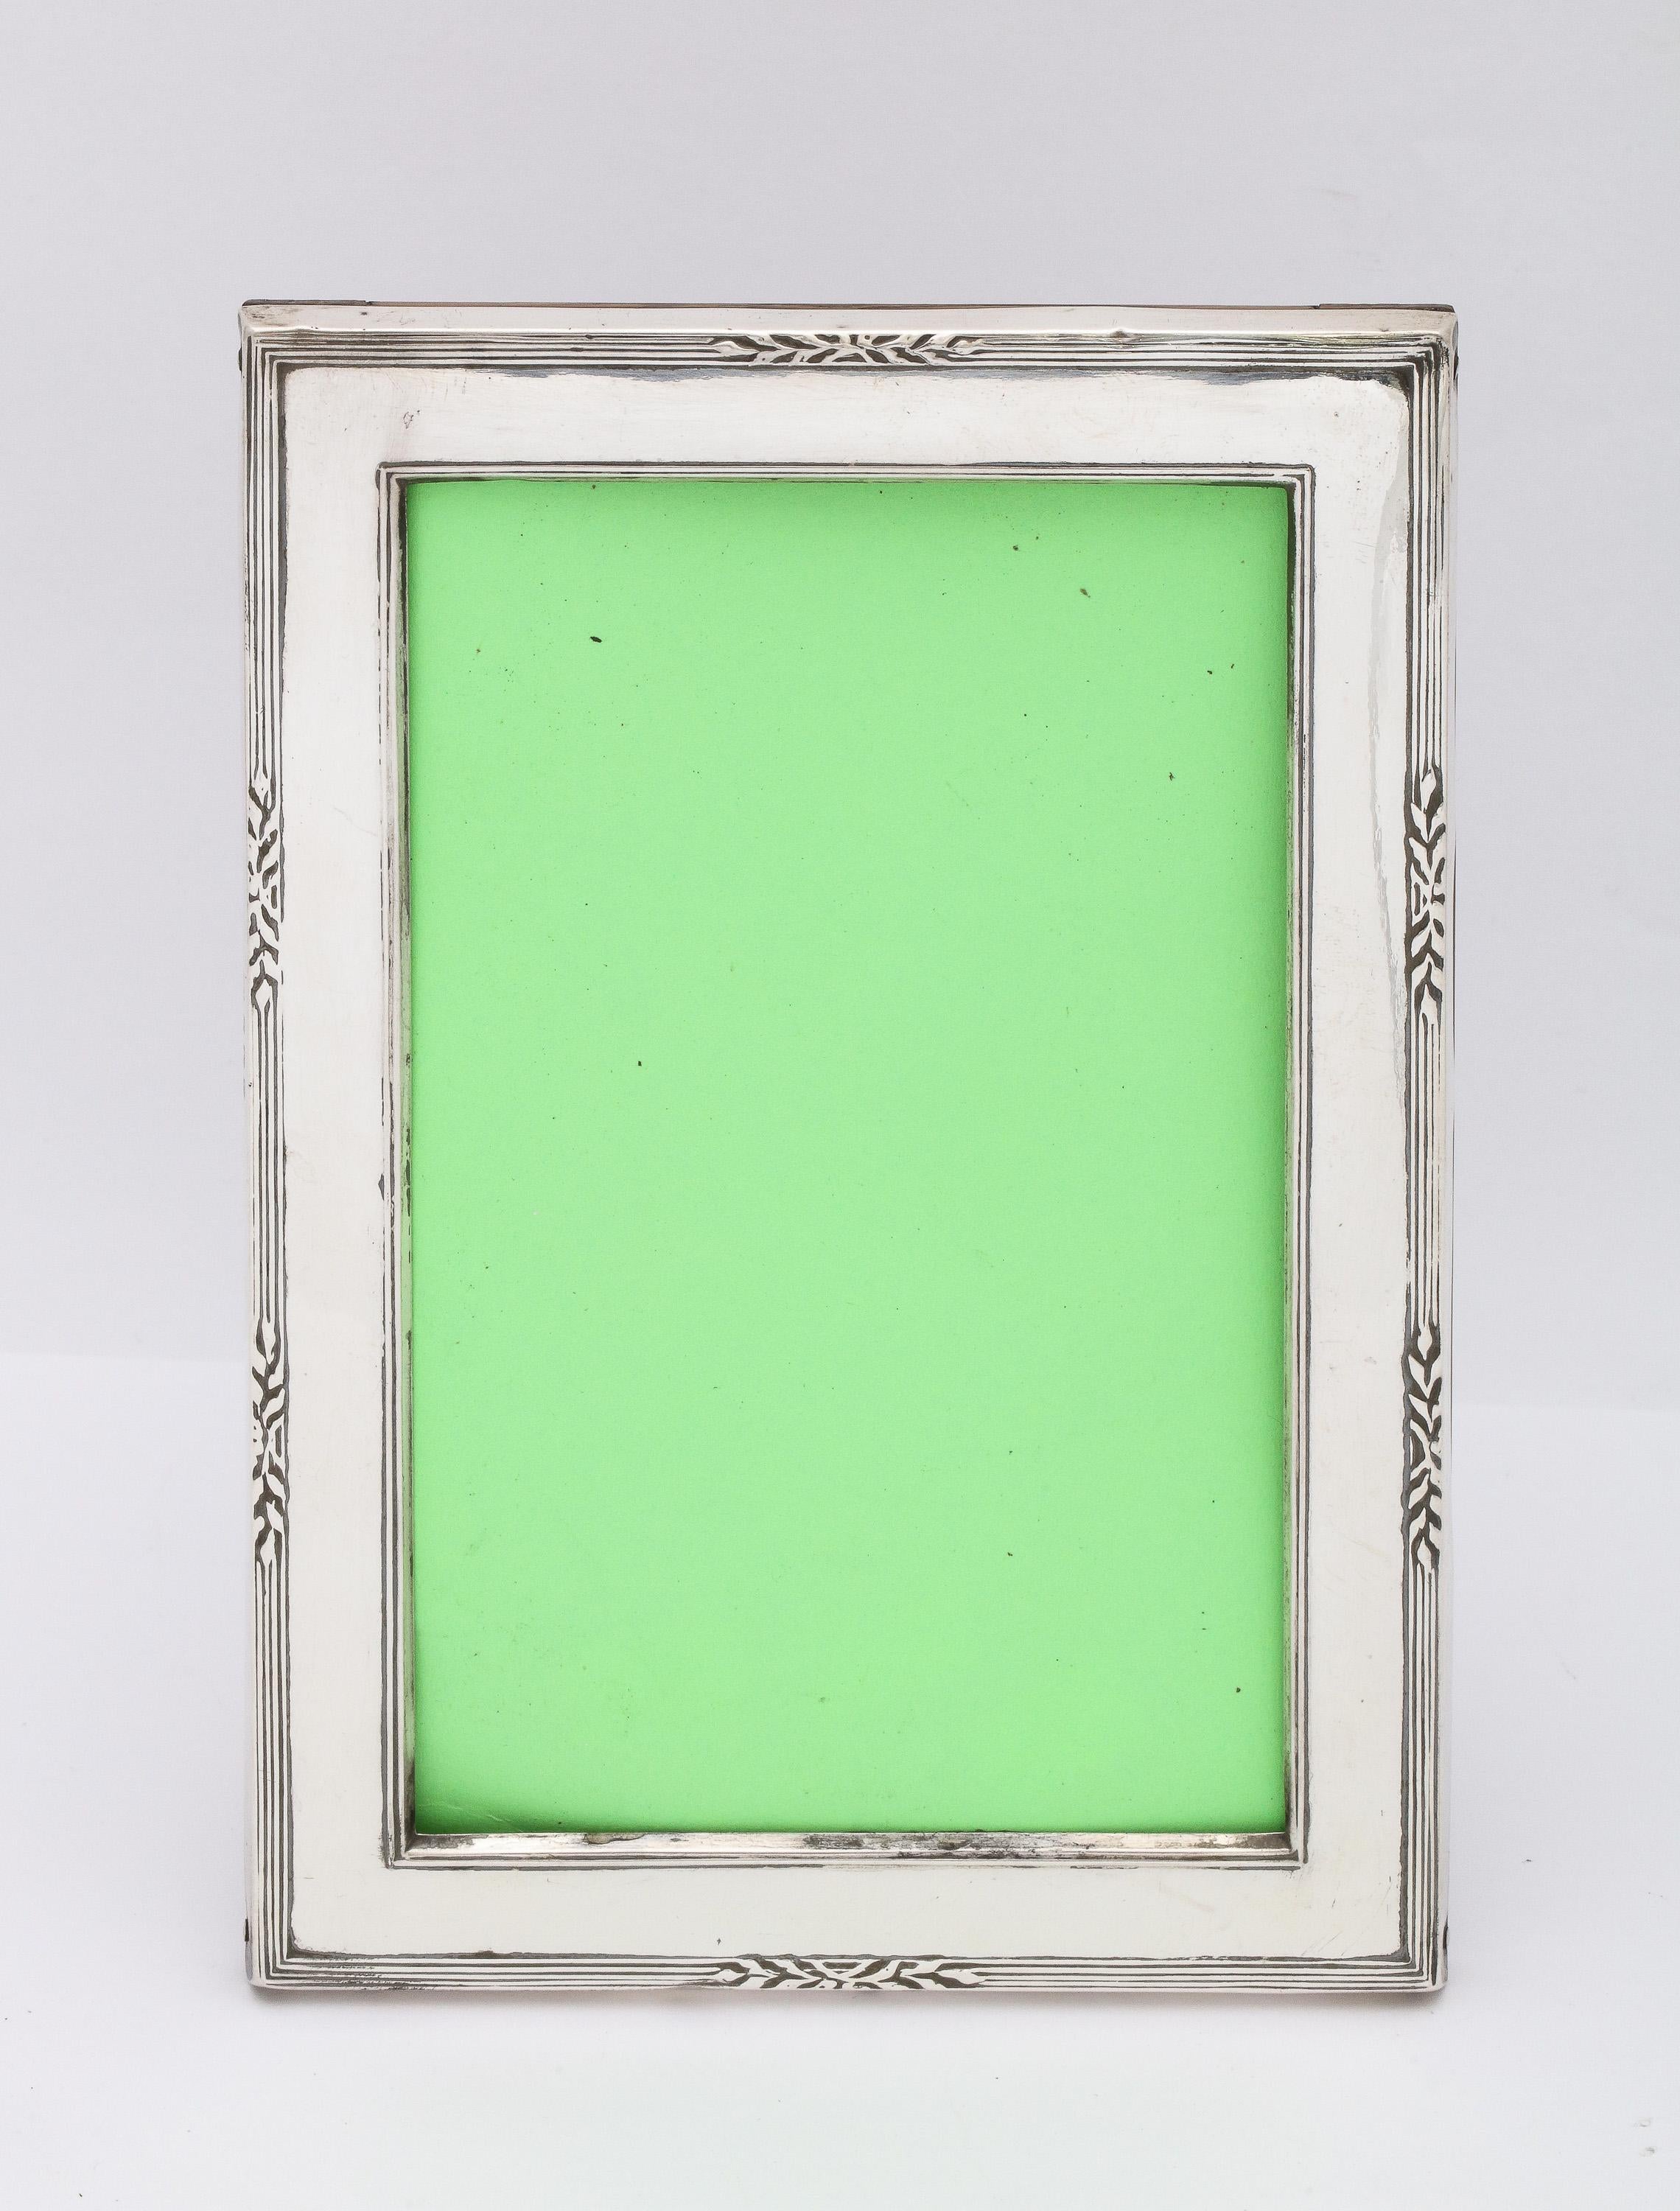 Edwardian-style, sterling silver-mounted wood - backed picture frame, Birmingham, England, year-hallmarked for 1928, Samuel McLardy - maker. Outer measurements of frame are 4 1/2 inches wide x 6 1/2 inches high x 3 3/4 inches deep (when easel is in